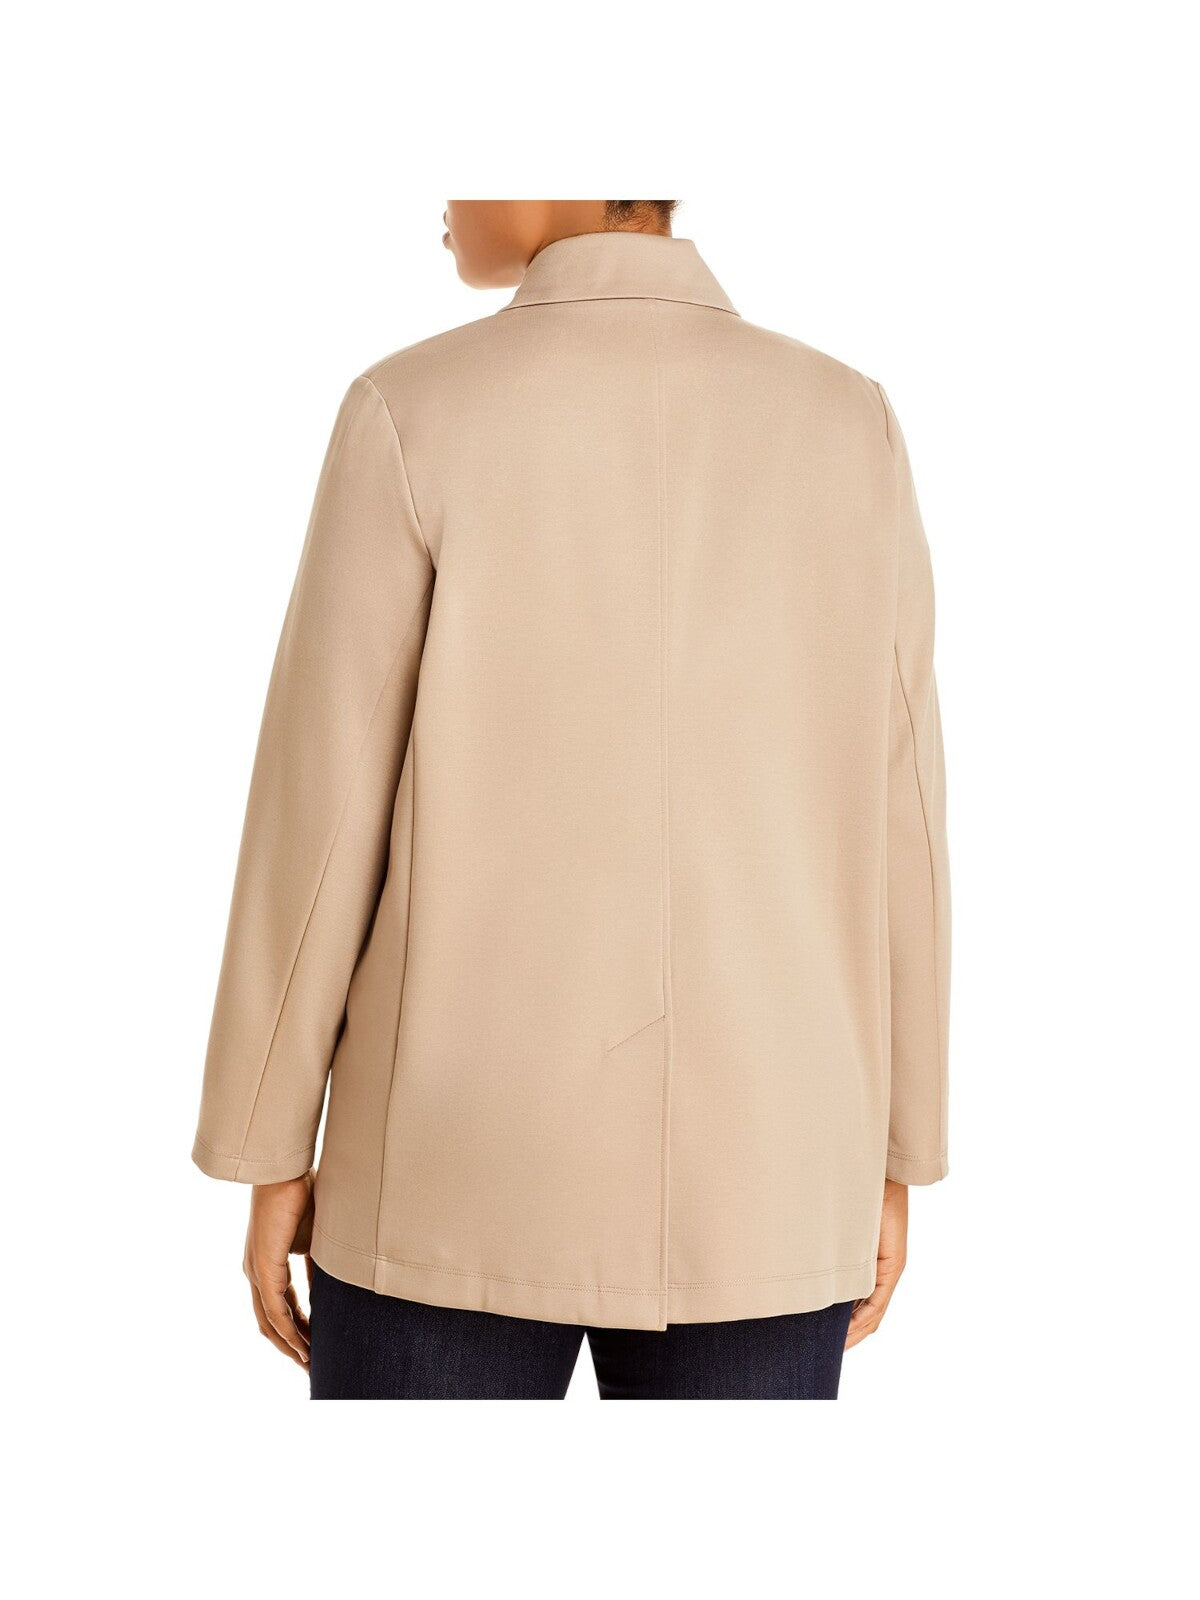 EILEEN FISHER Womens Beige Pocketed Notch Collar Back Vent Long Sleeve Wear To Work Jacket Plus 2X